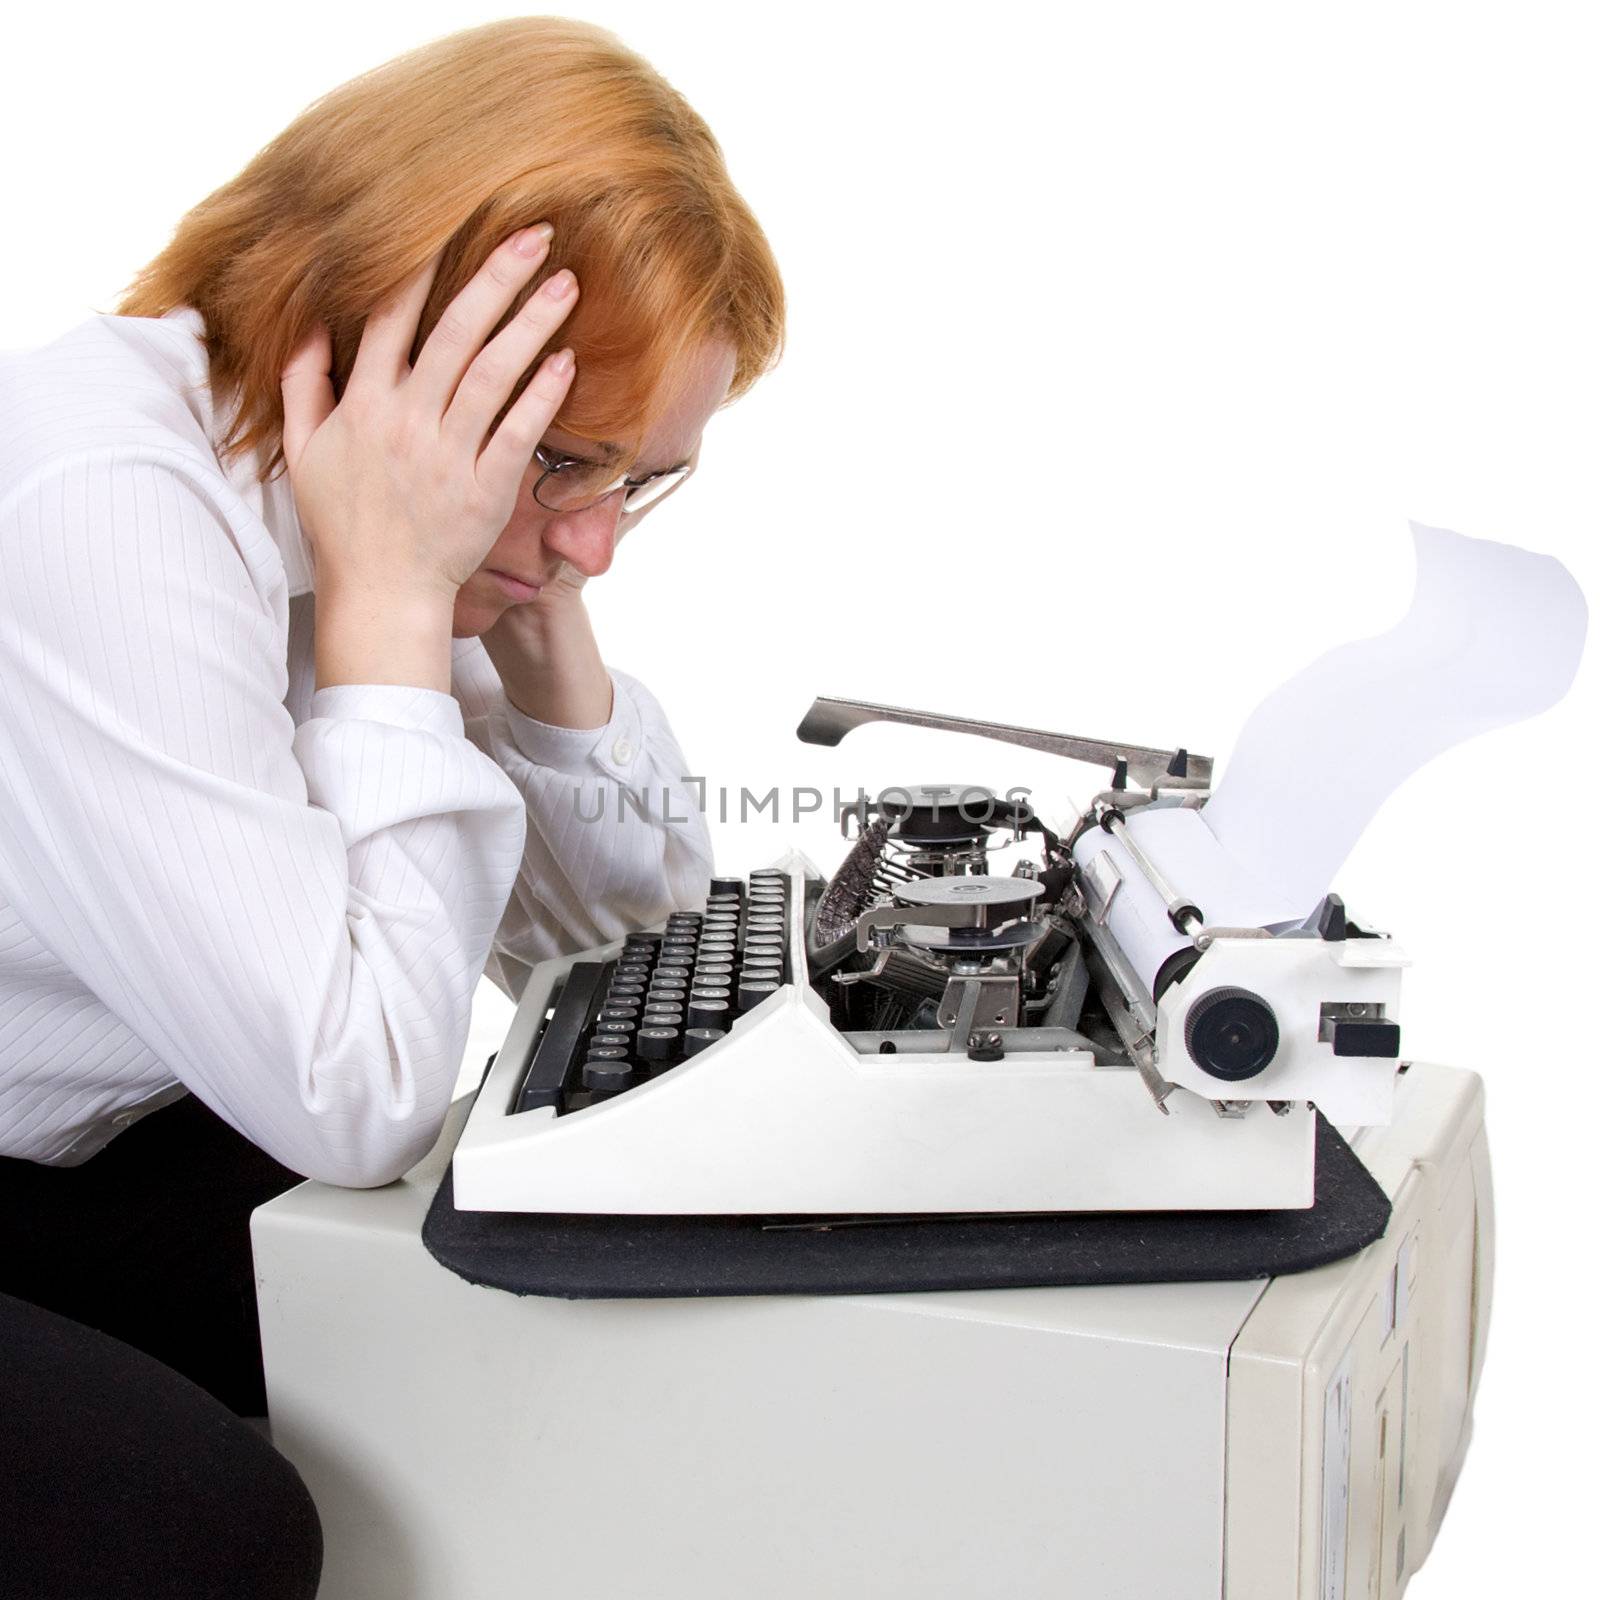 The woman near a typewriter on a white background